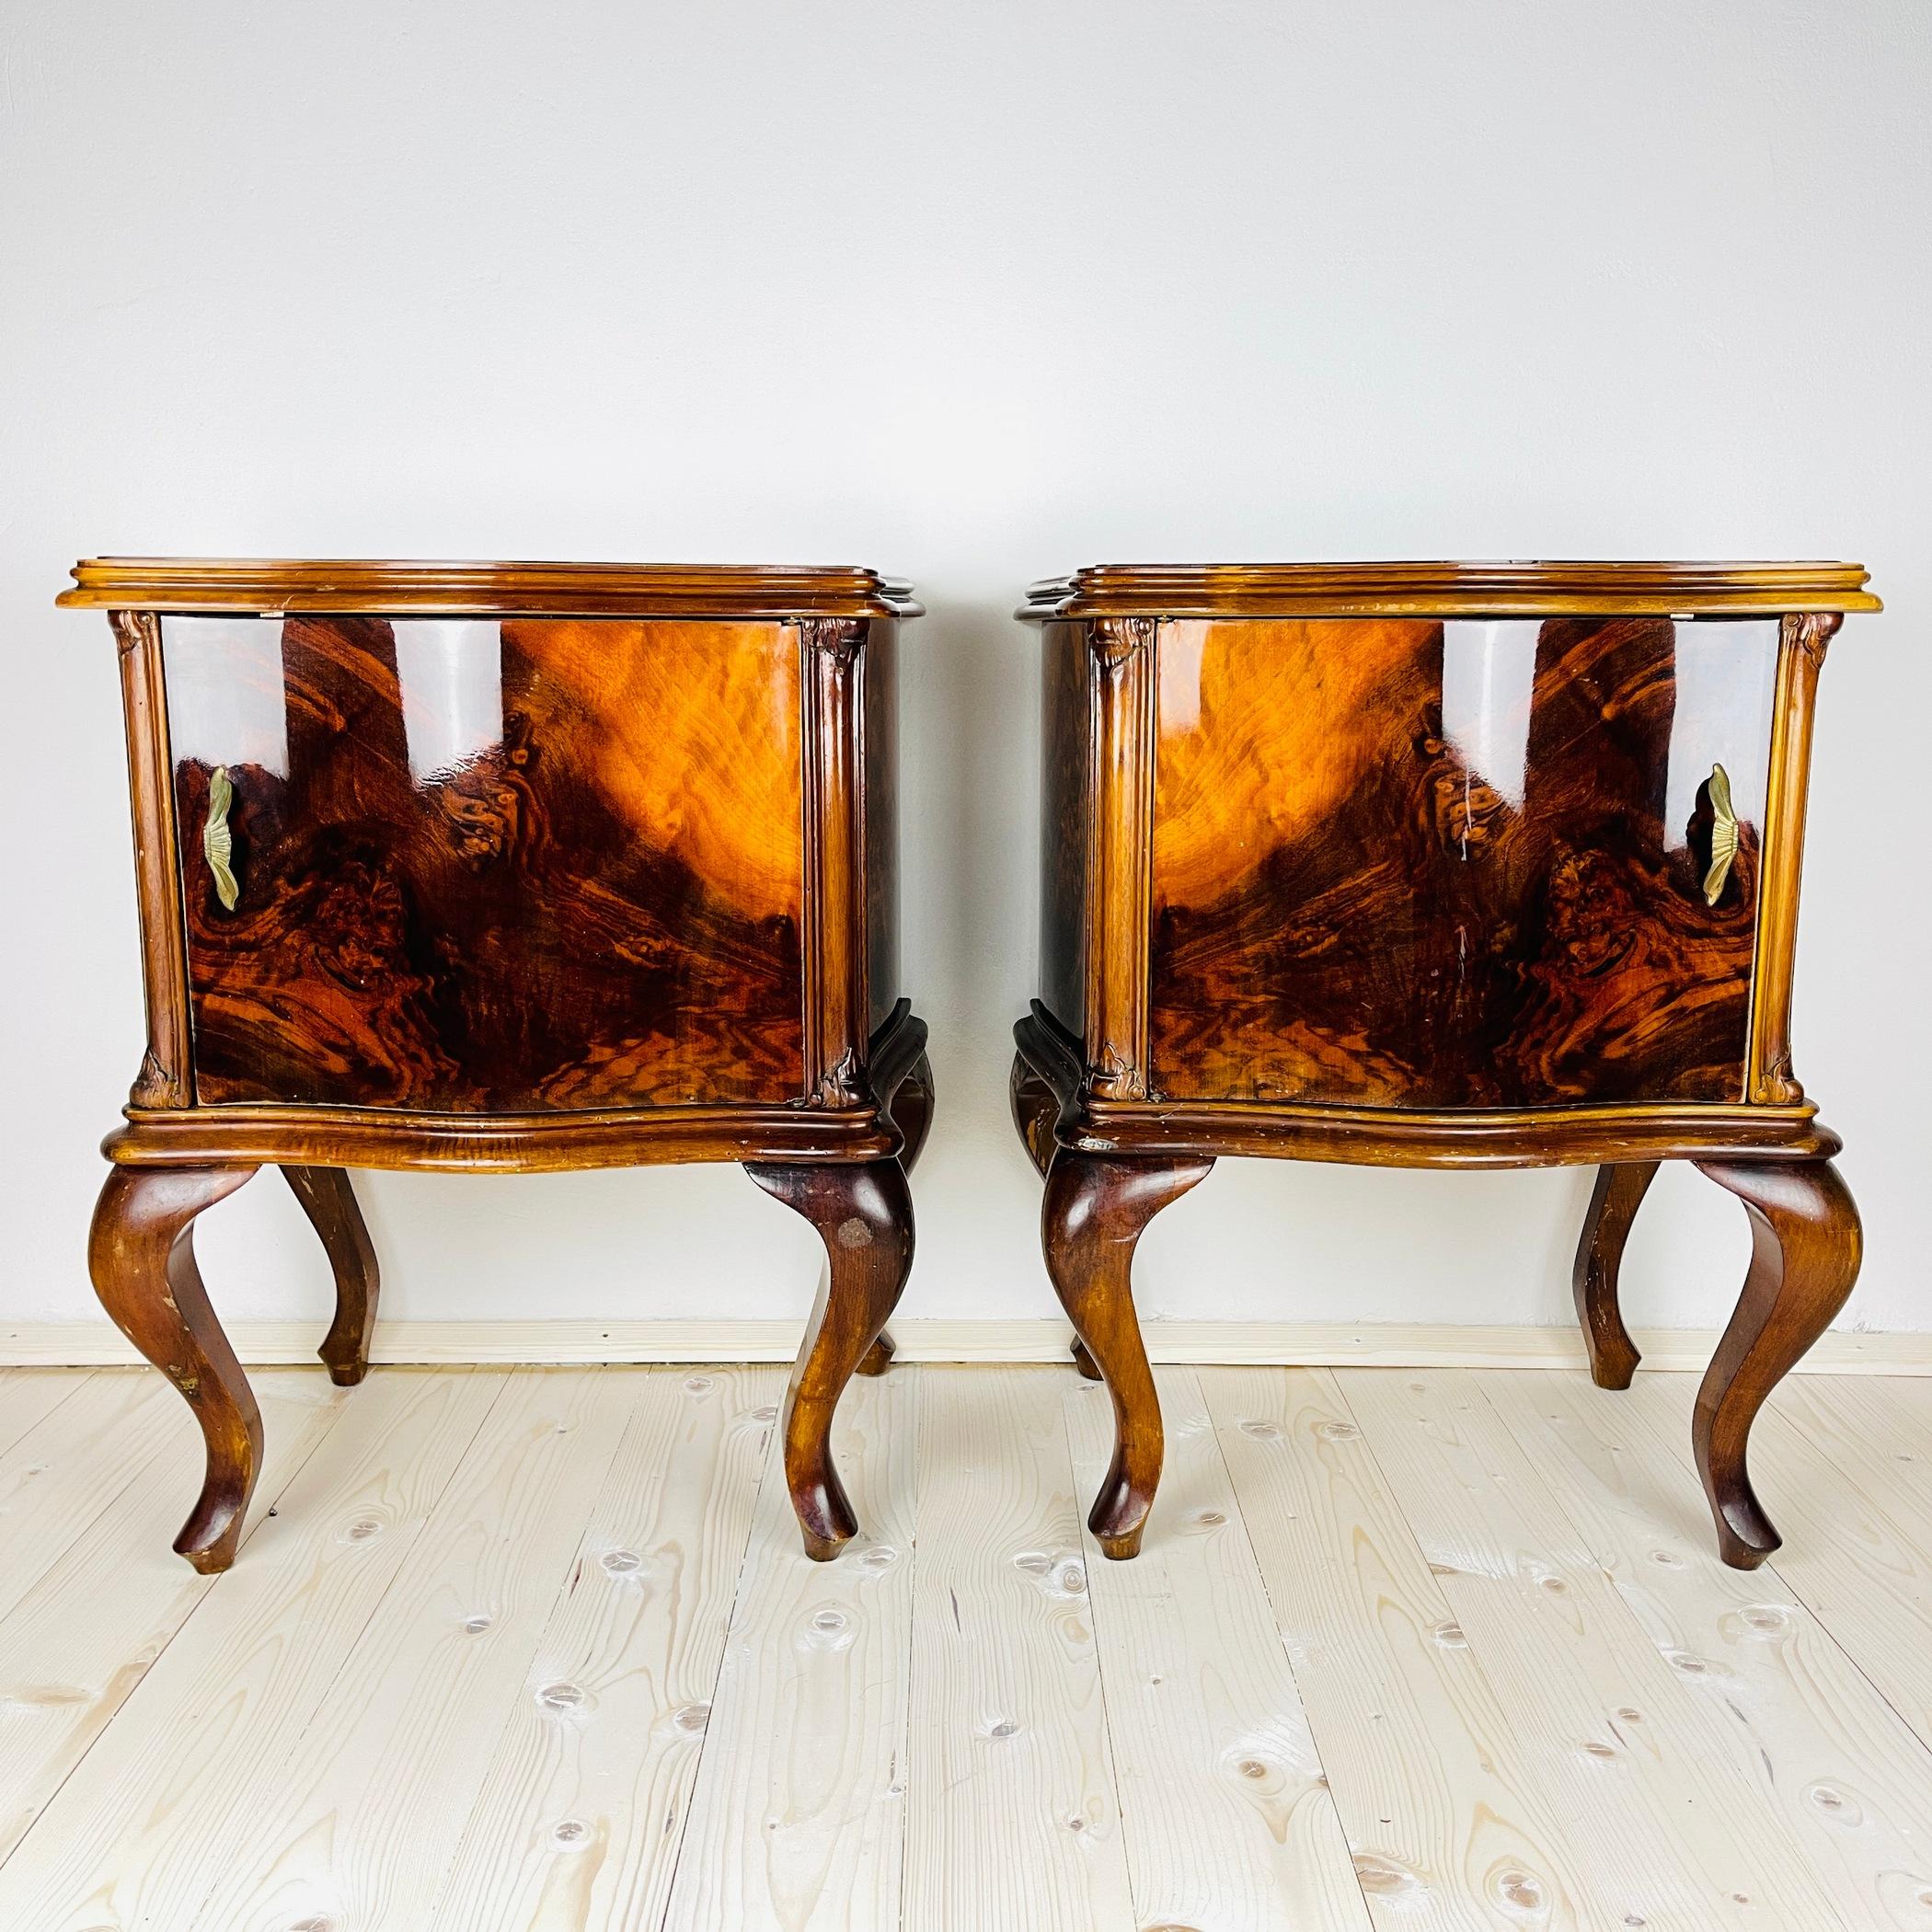 Pair beautiful bedside tables were made in the 1960s in Italy. Made of solid wood, plywood. Original fittings. They have been preserved to this day in good condition. Despite their venerable age, they look excellent. There are signs of wear and tear